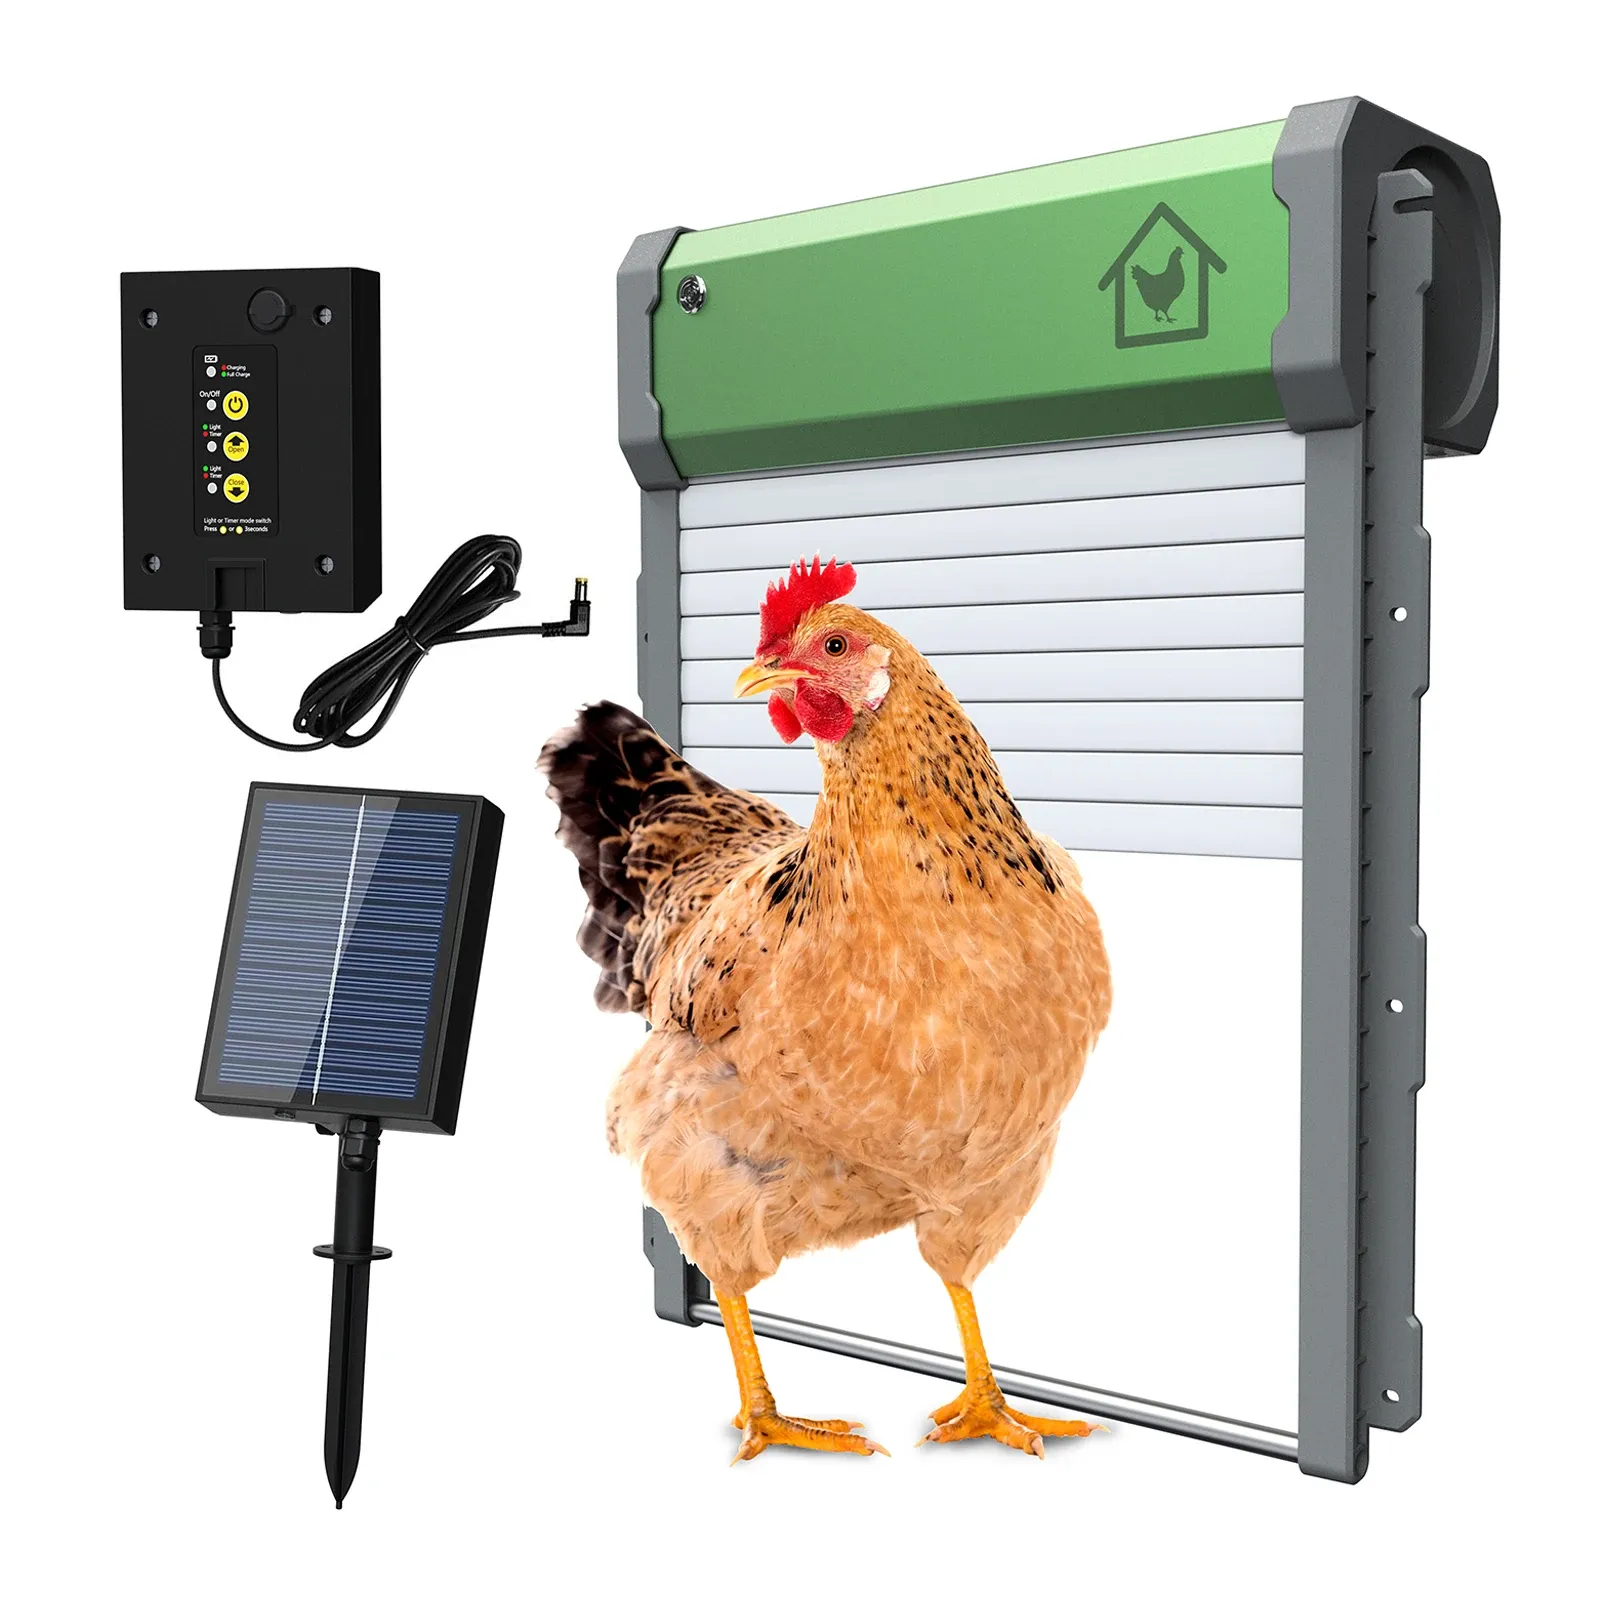 Accessories Automatic Chicken Coop Door Solar Powered Chicken Door with Timer/Remote Control/Manual Mode 4 Modes with AntiPinch Design